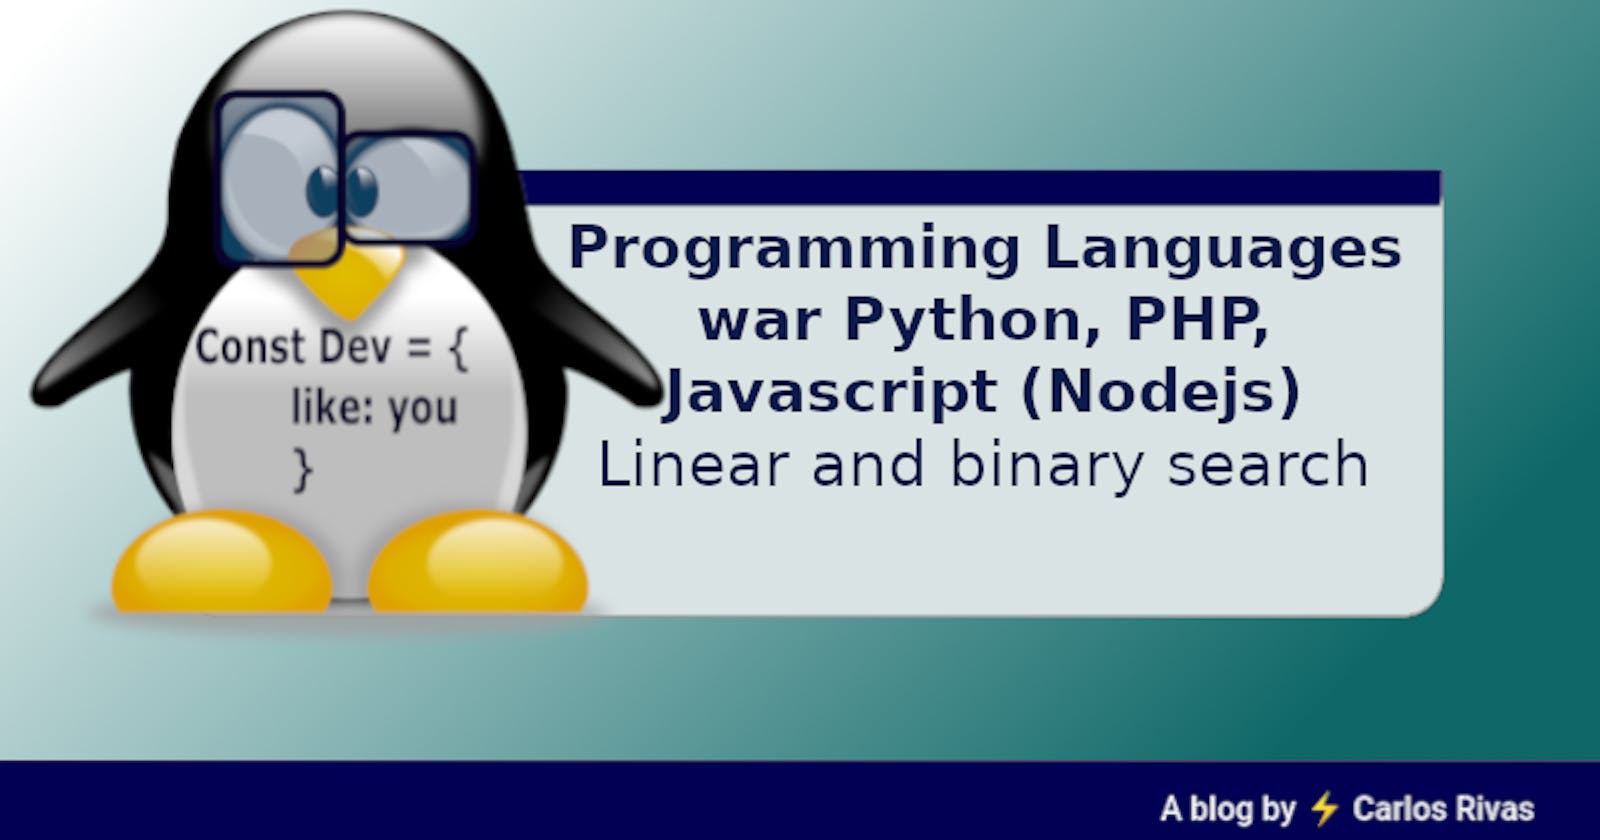 Programming Languages war
Python, PHP, Javascript (Nodejs)
Linear and binary search